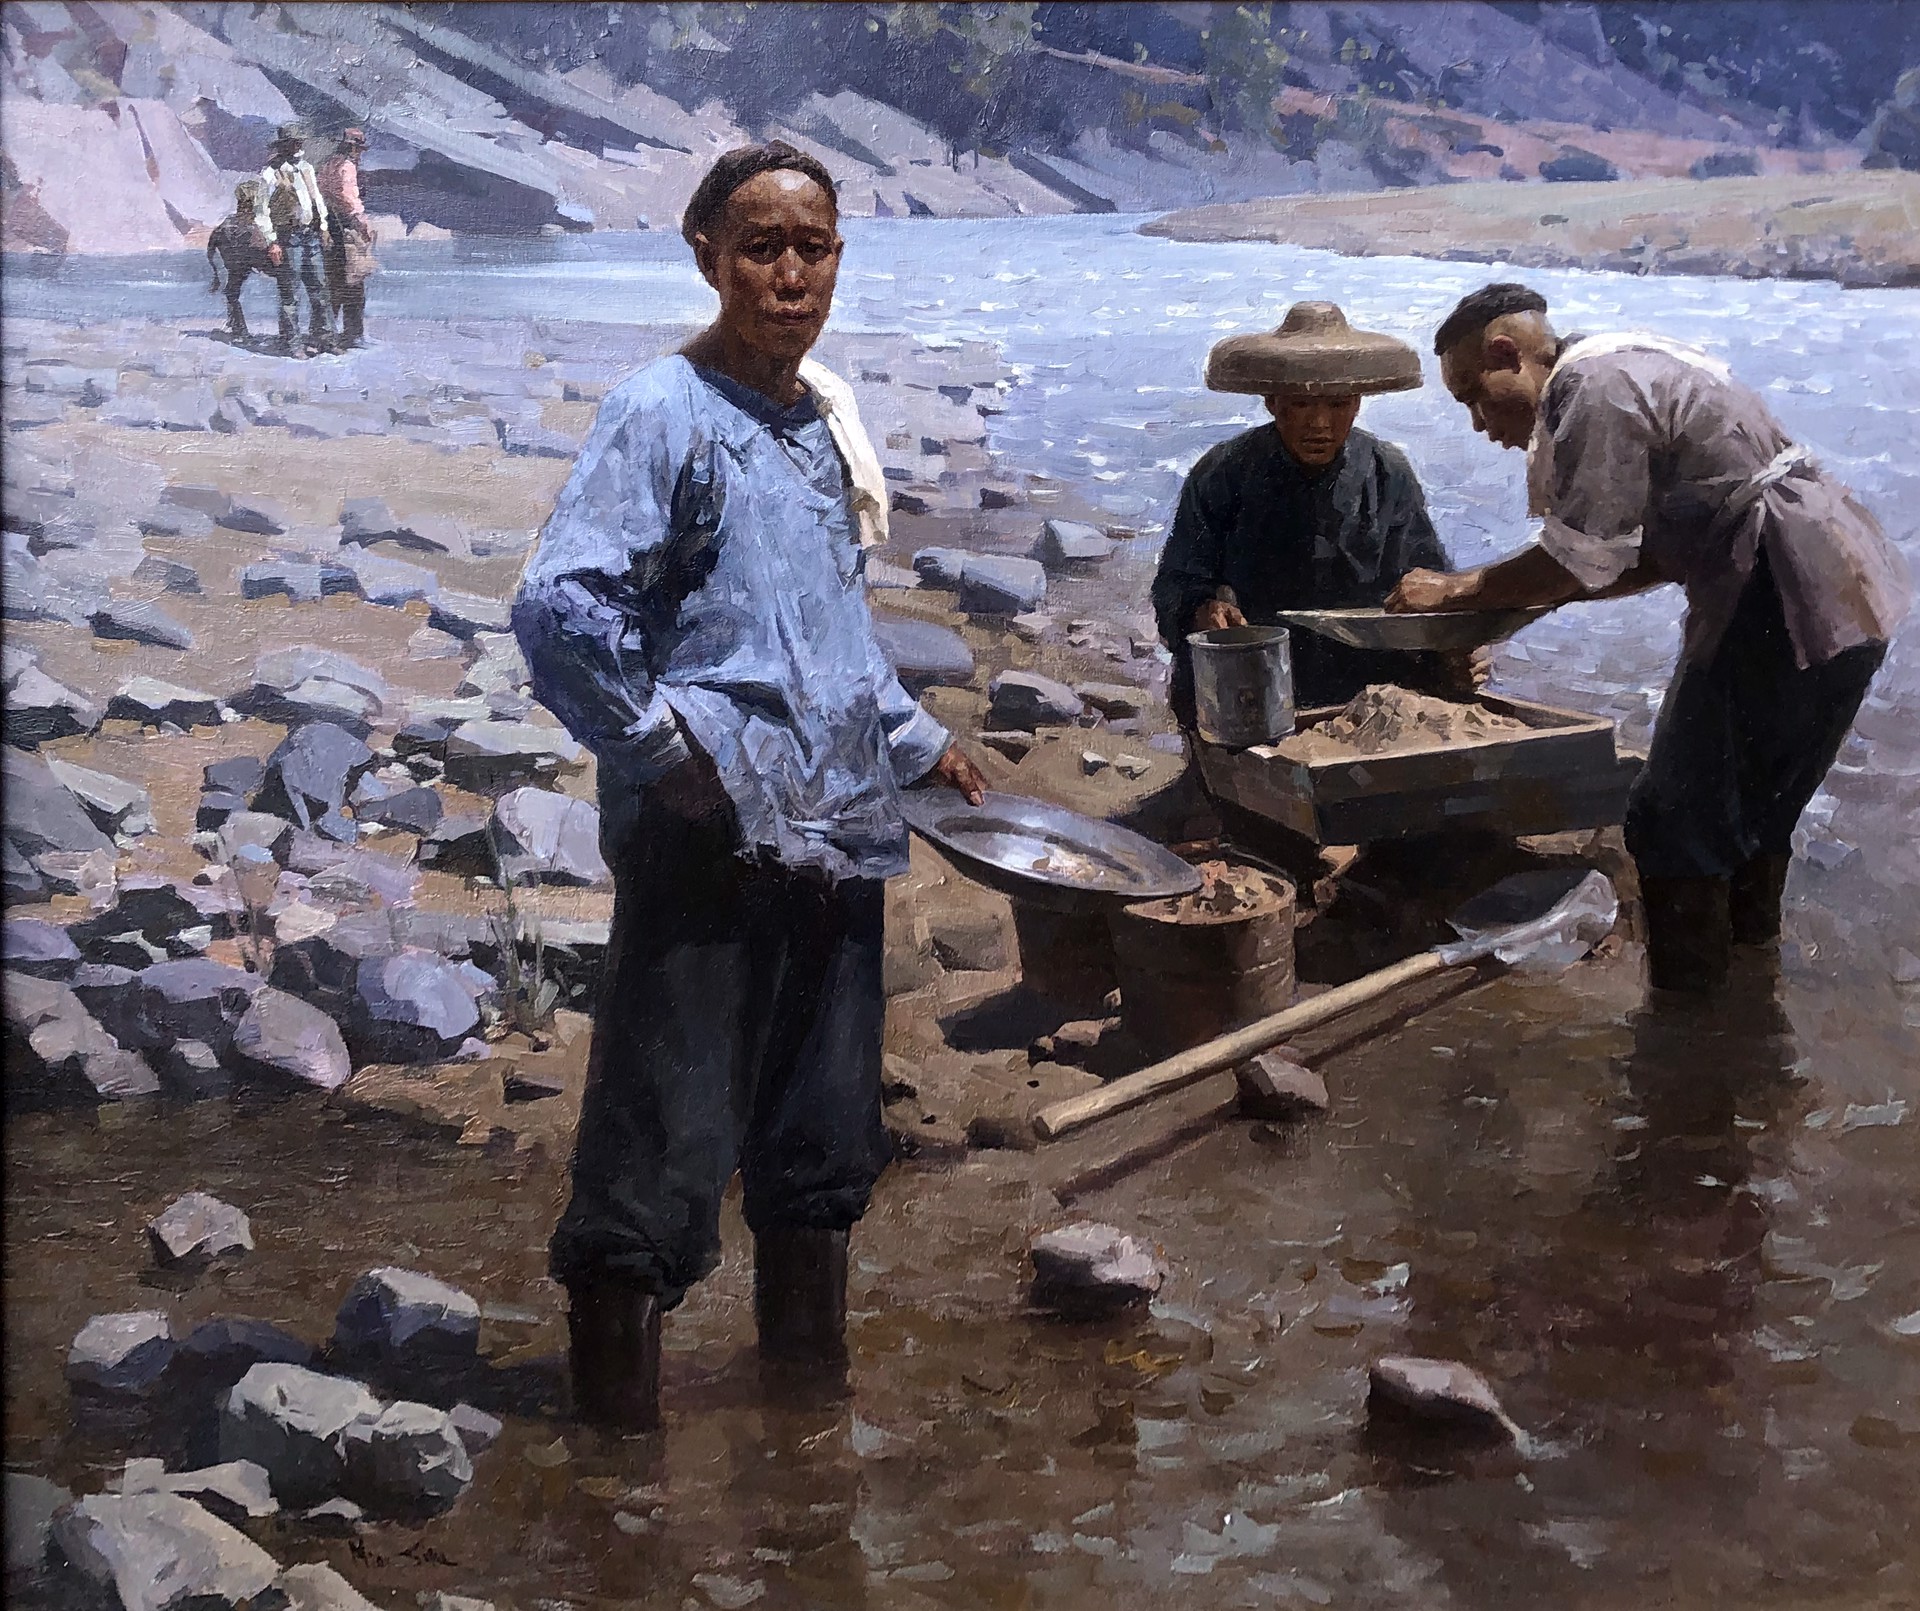 Sweat and Toiling by Mian Situ